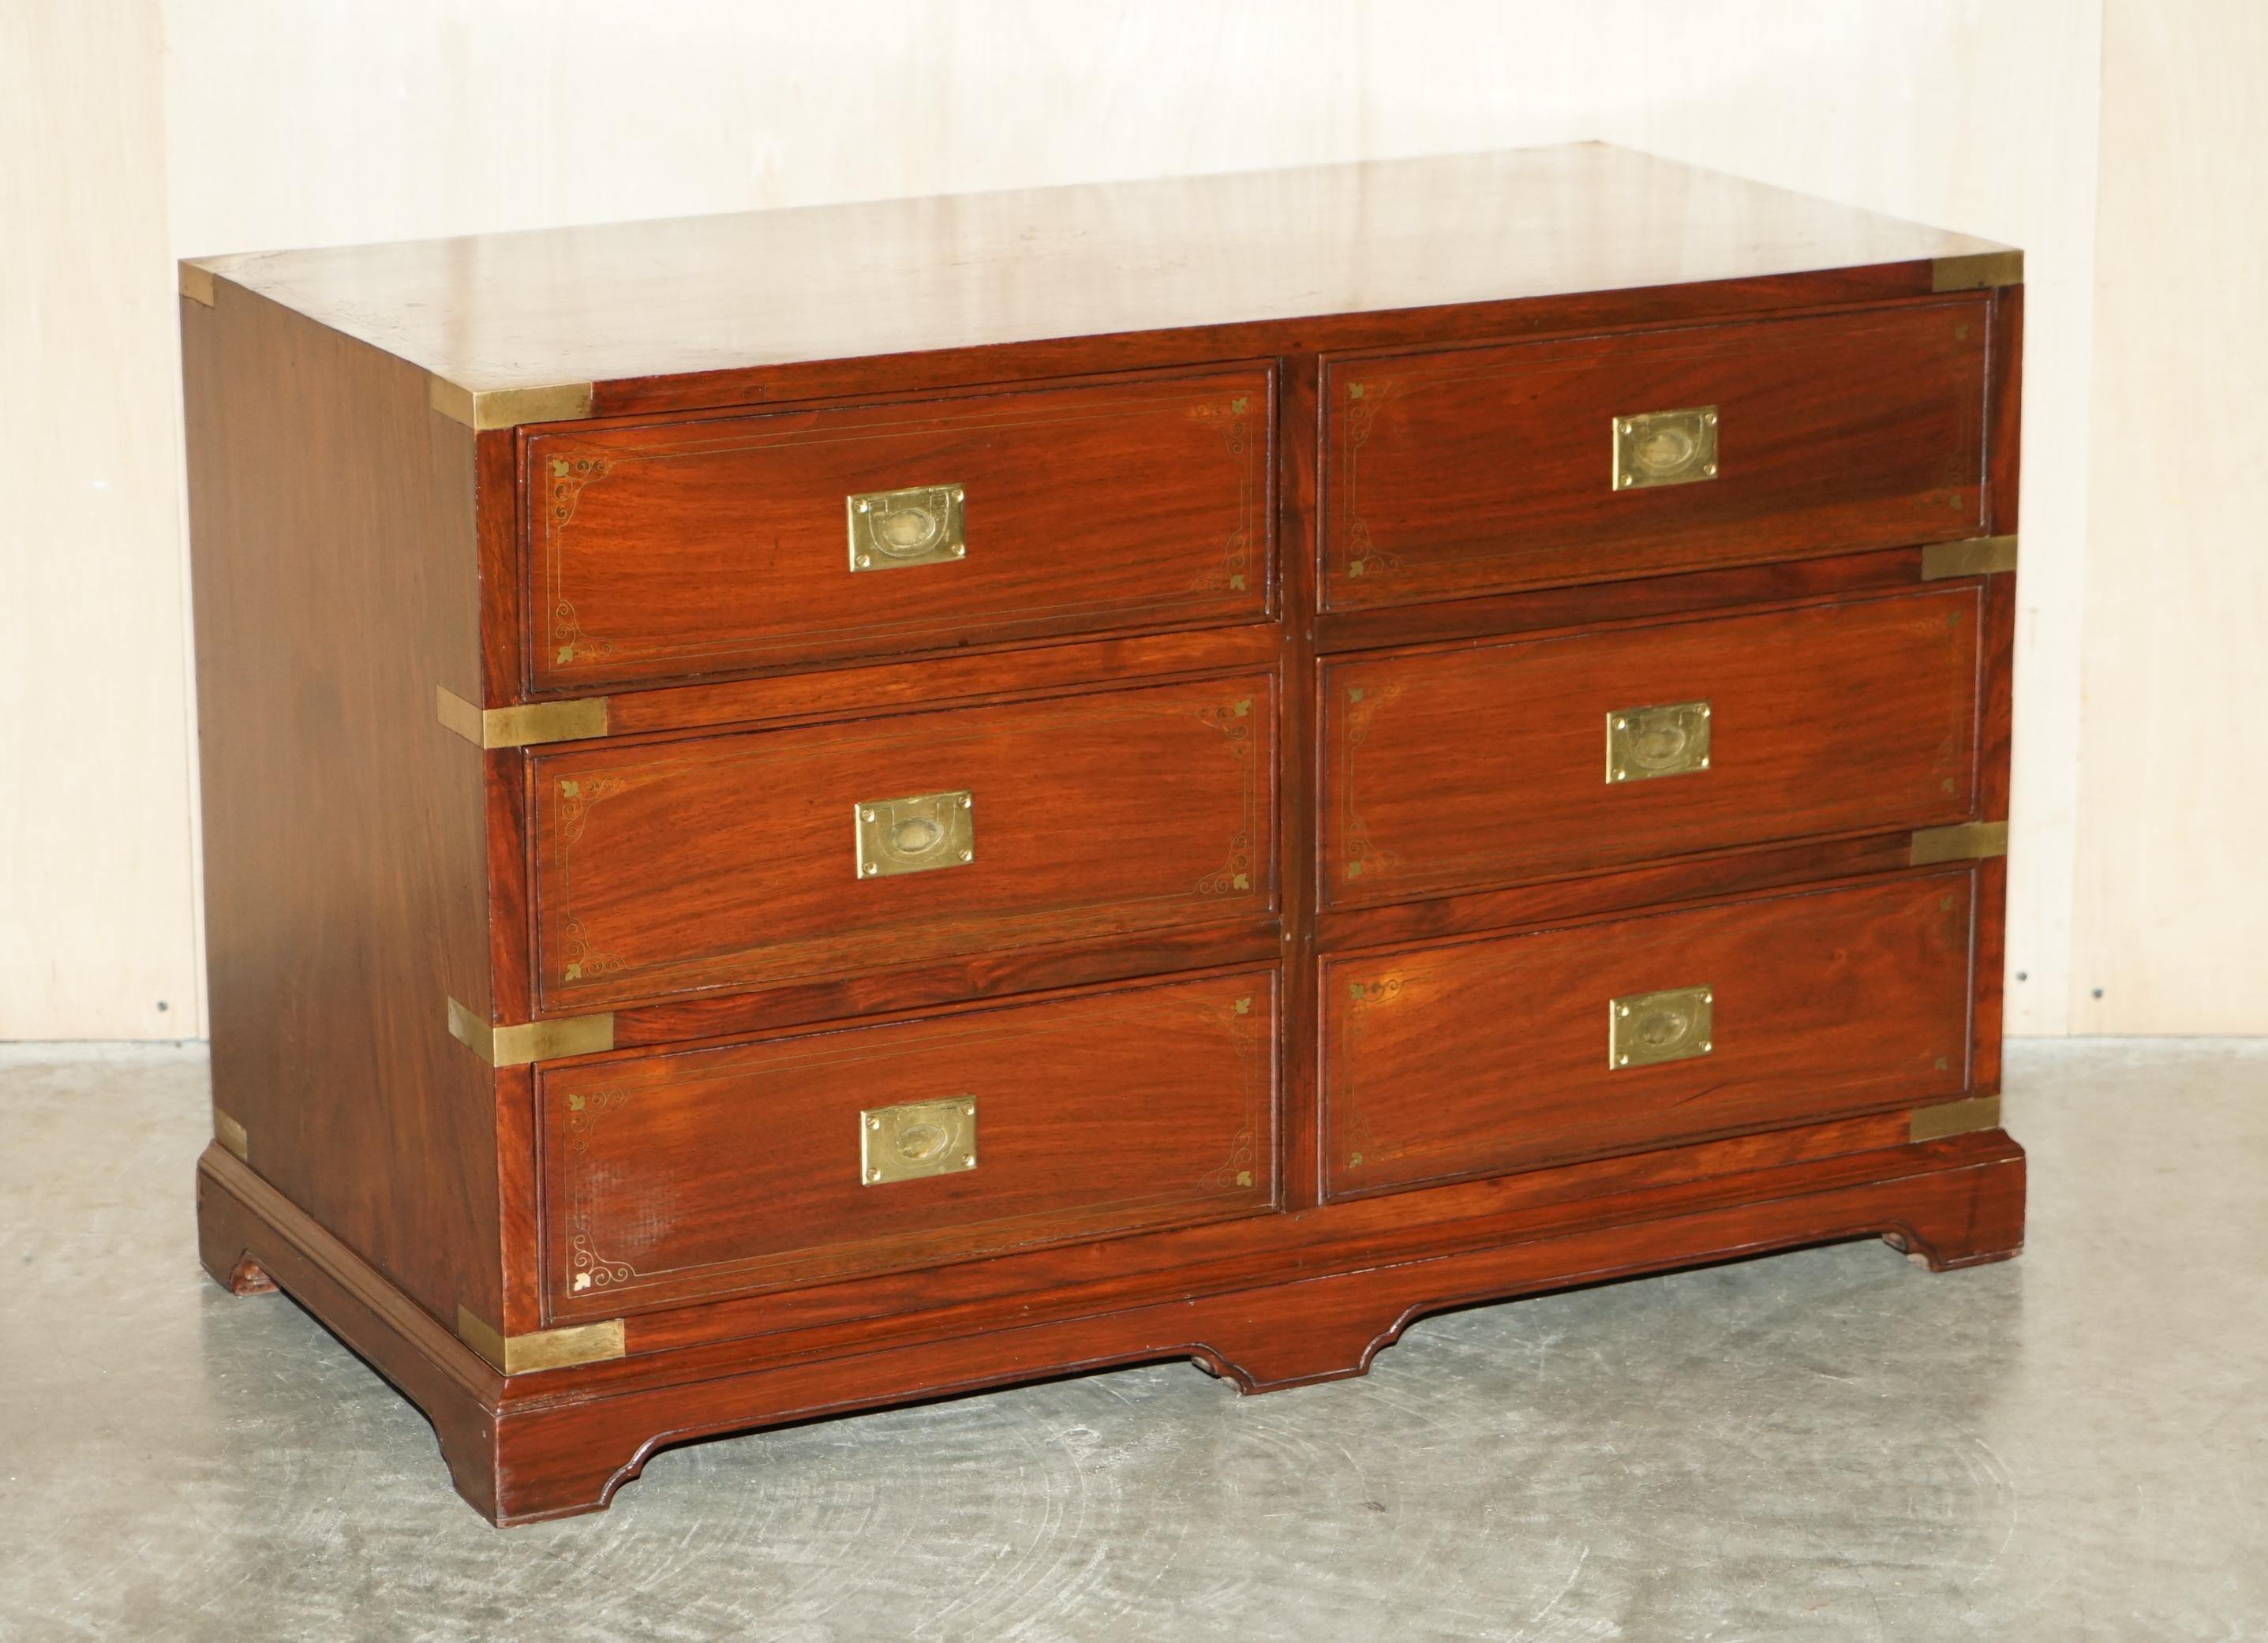 We are delighted to offer for sale this stunning original Anglo Indian circa 1920's Rosewood with Brass inlay Military Campaign chest of drawers

A very good looking well made and decorative piece, these were made during England's occupation of